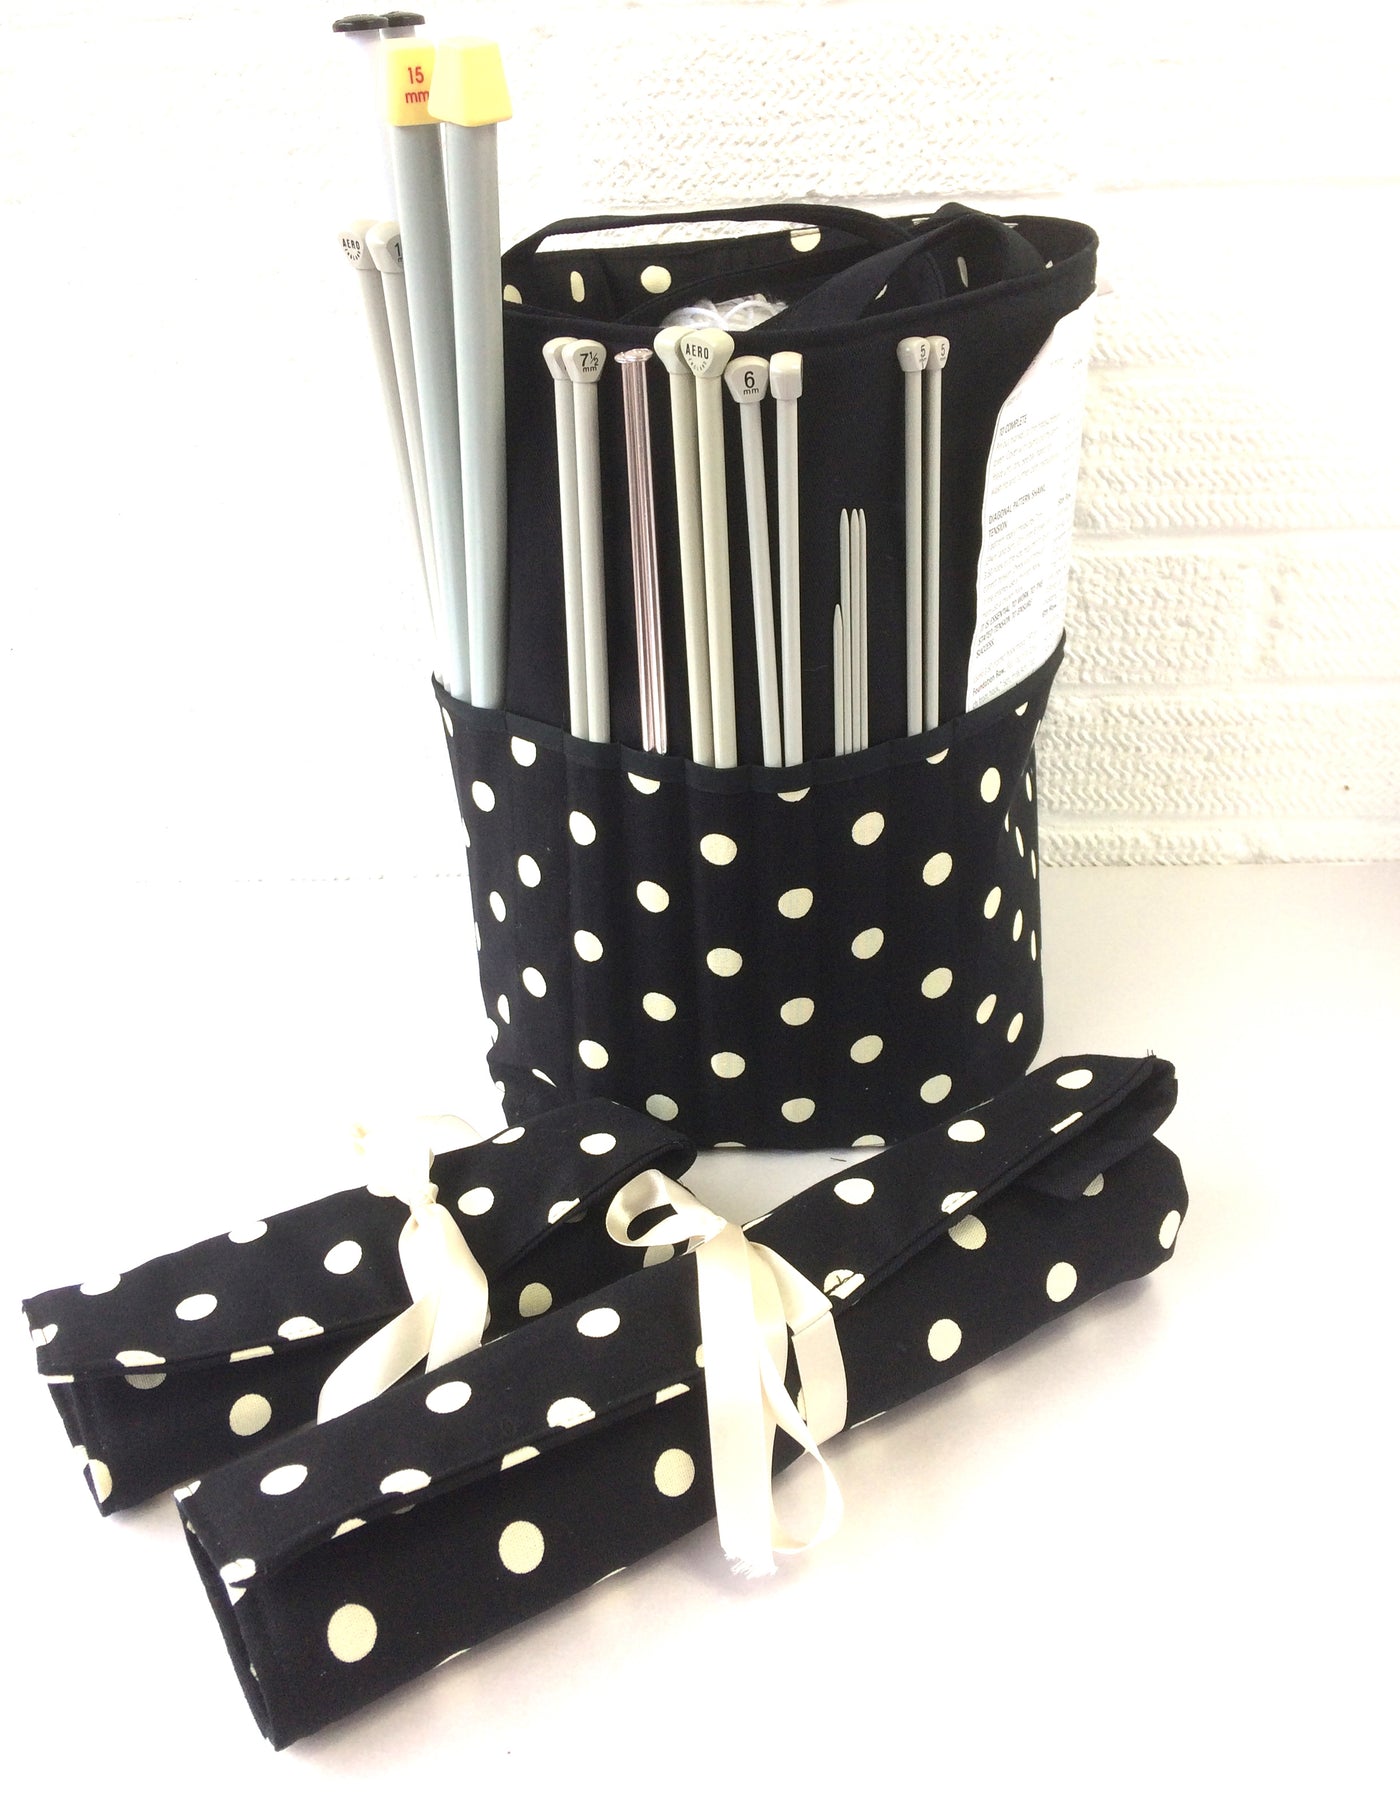 Knitting bag made with black spotted canvas